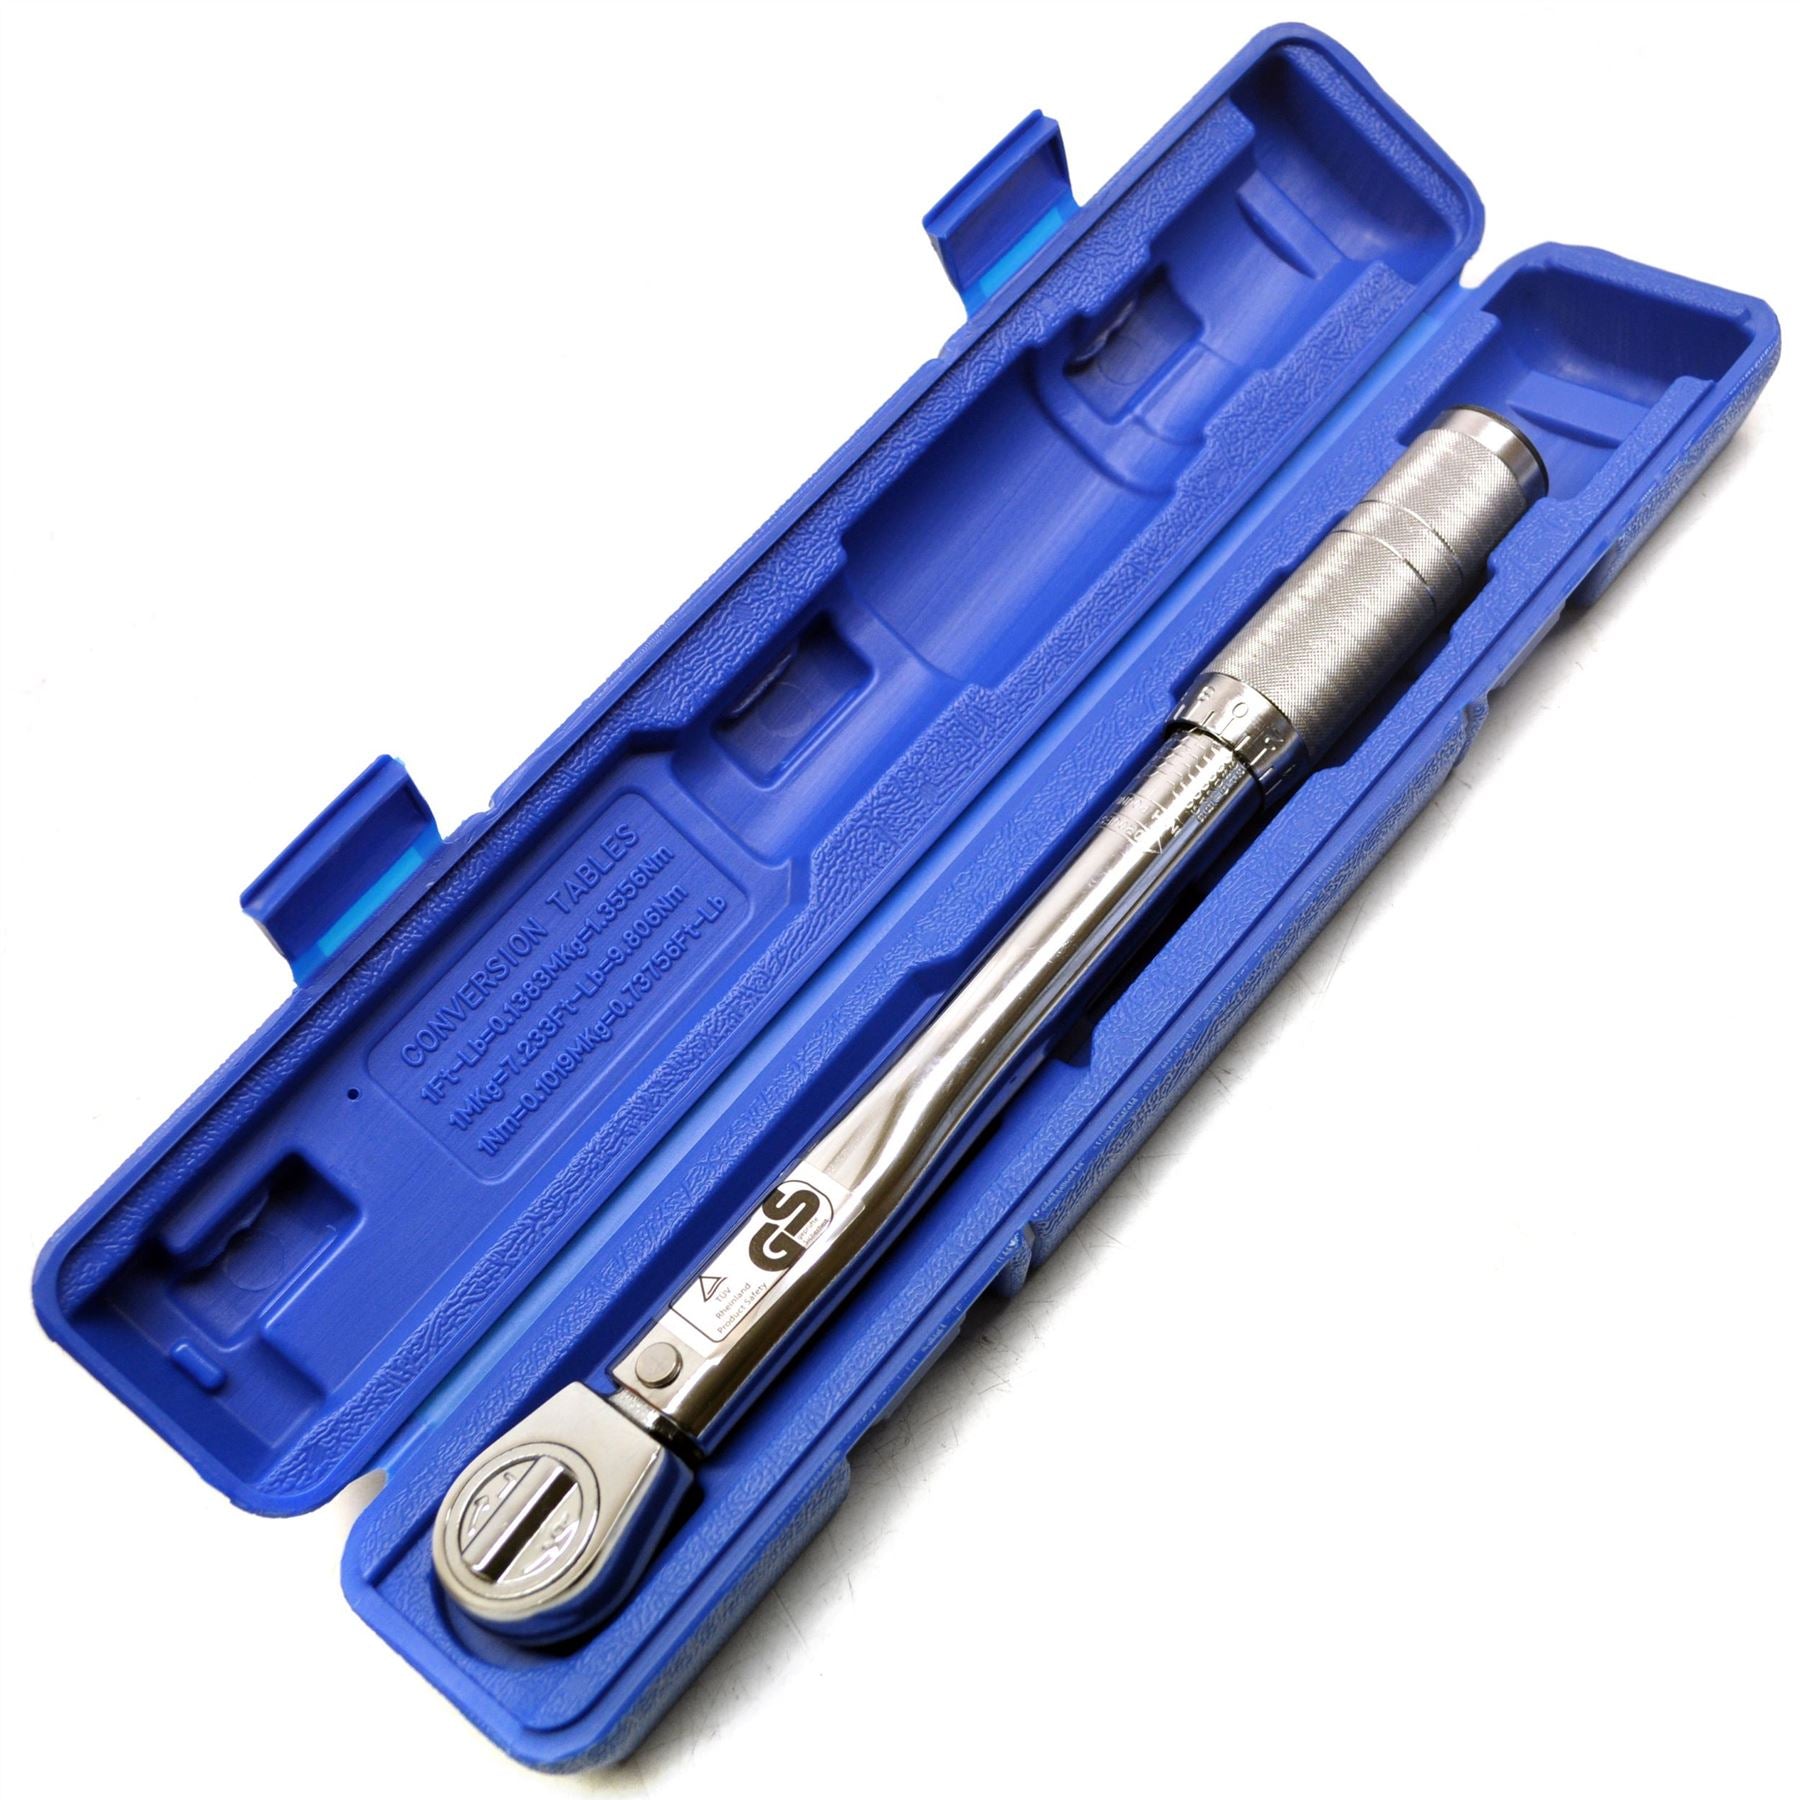 3/8" dr Ratchet Torque Wrench 20-110Nm TE025